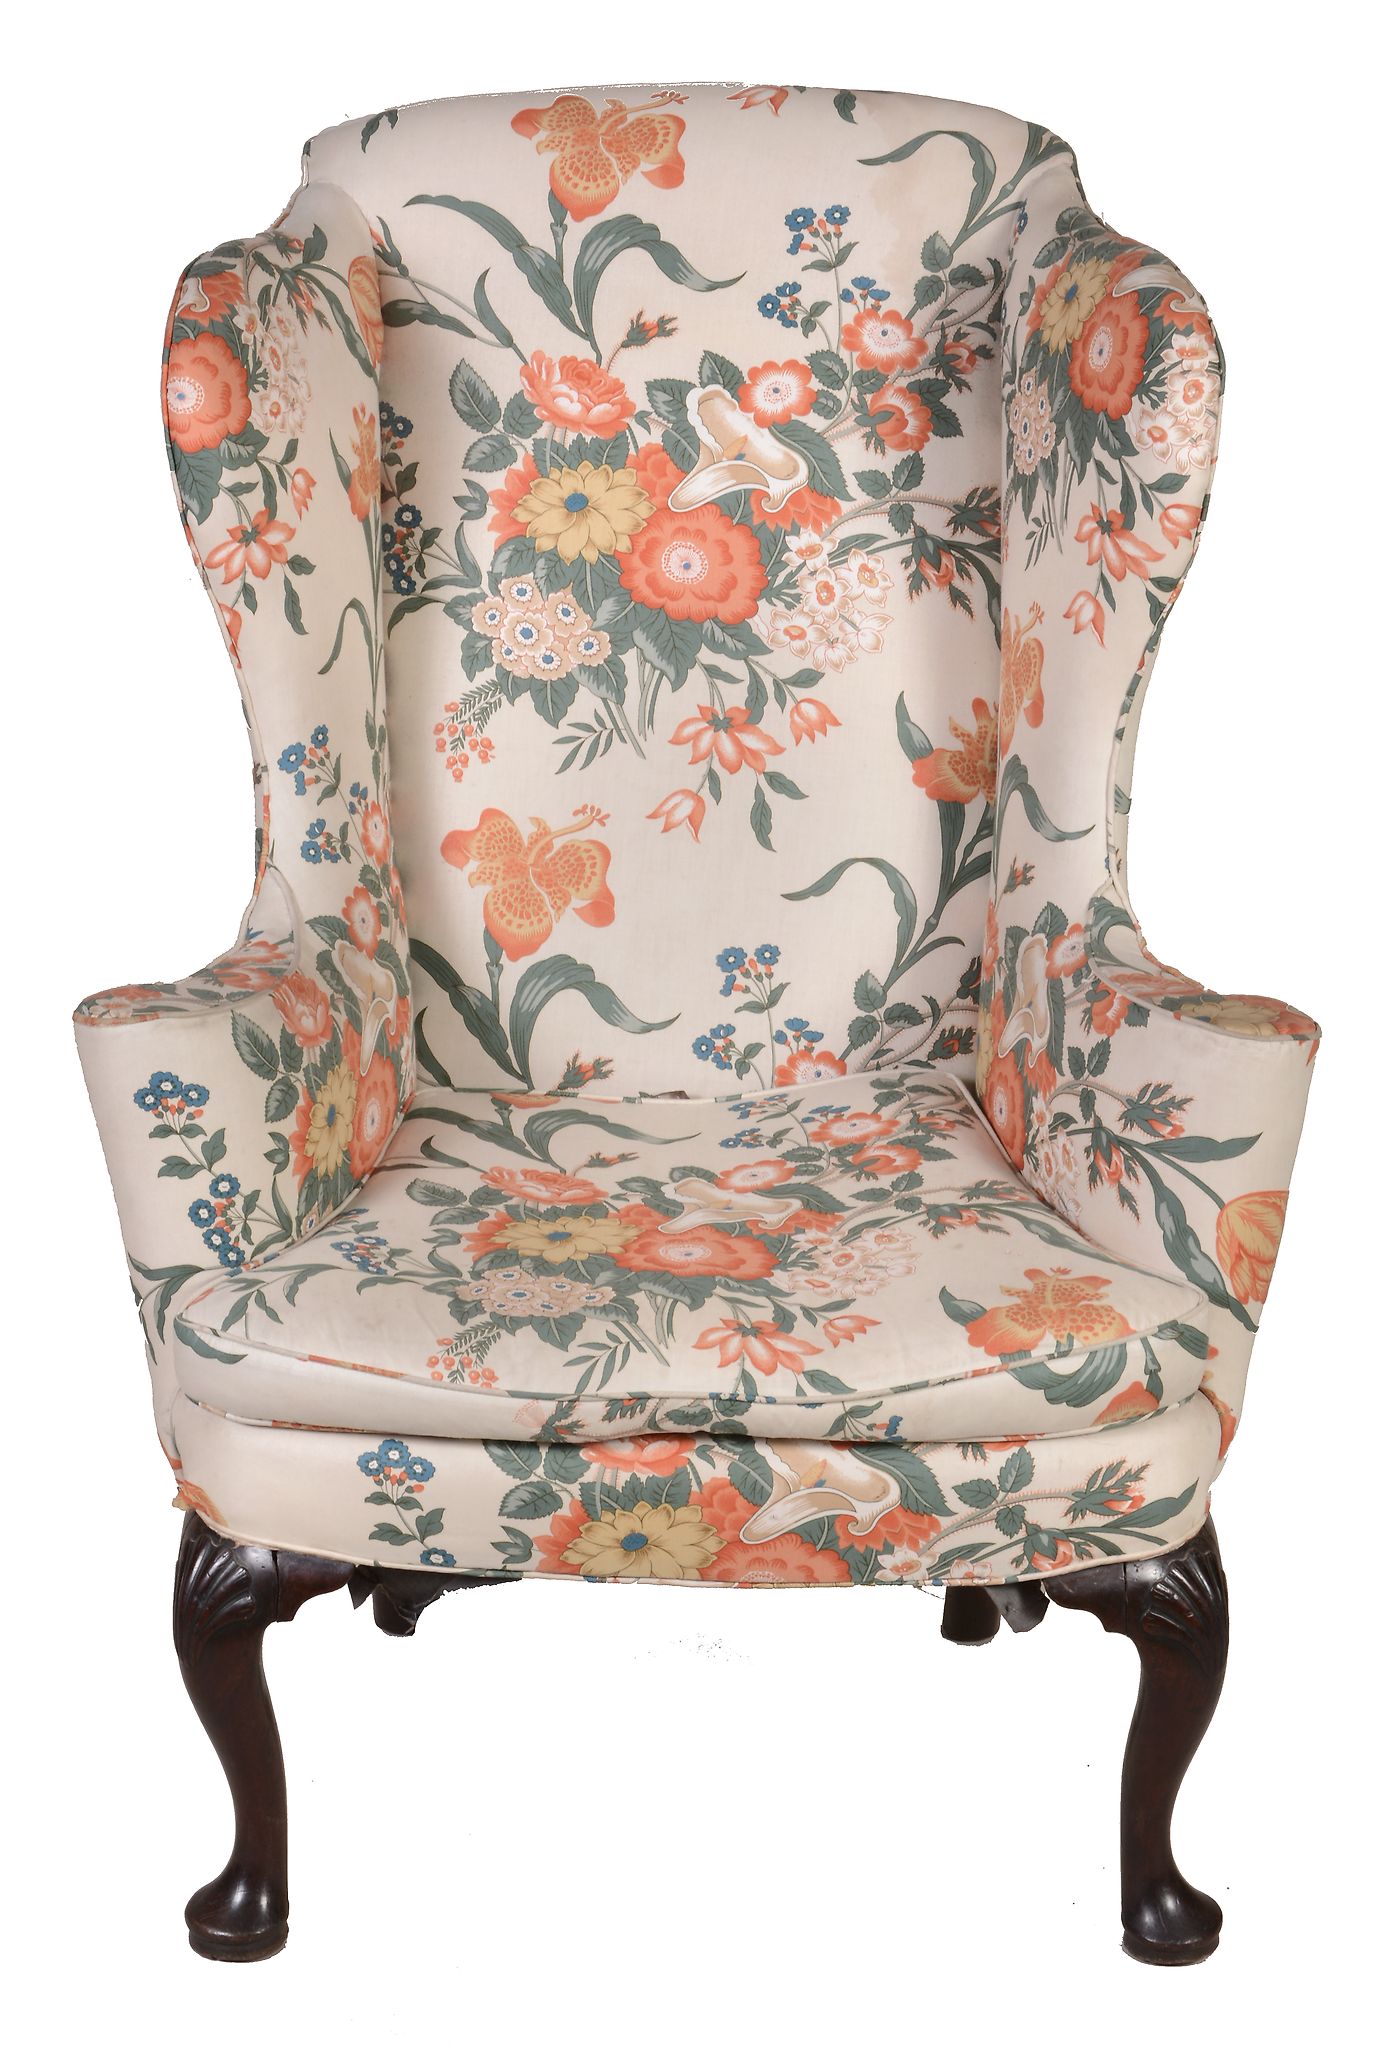 A George II mahogany and upholstered wing armchair , circa 1740   A George II mahogany and